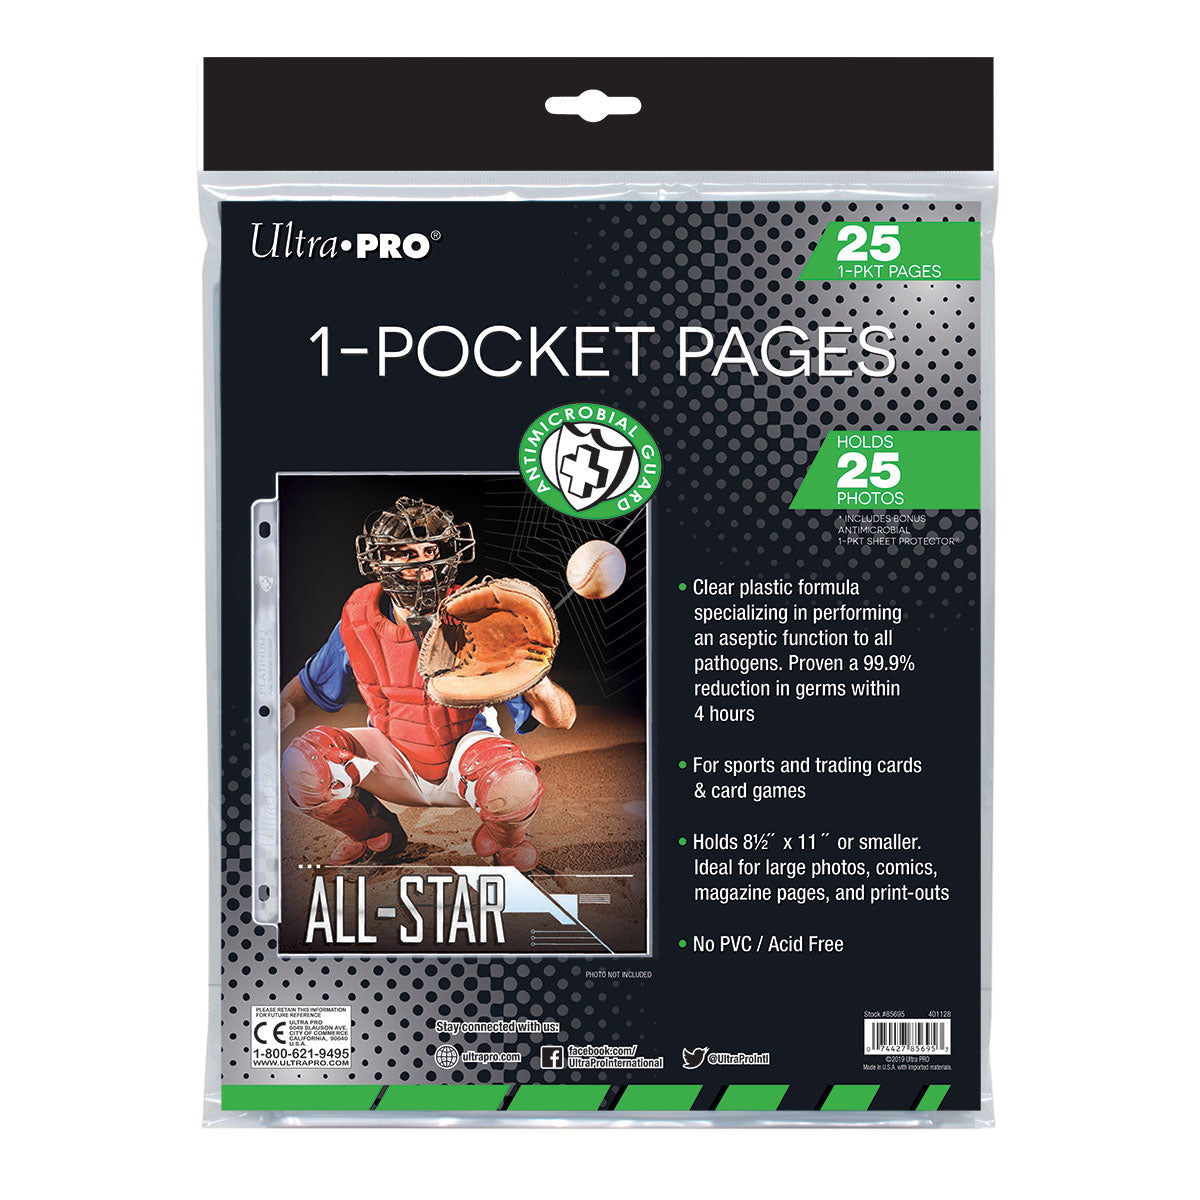  Ultra Pro 9 Pocket Pages Platinum Series 100 Pages of Card  Sleeves for Trading Baseball Card Binder, -Pokemon and Baseball Card  Sleeves : Toys & Games